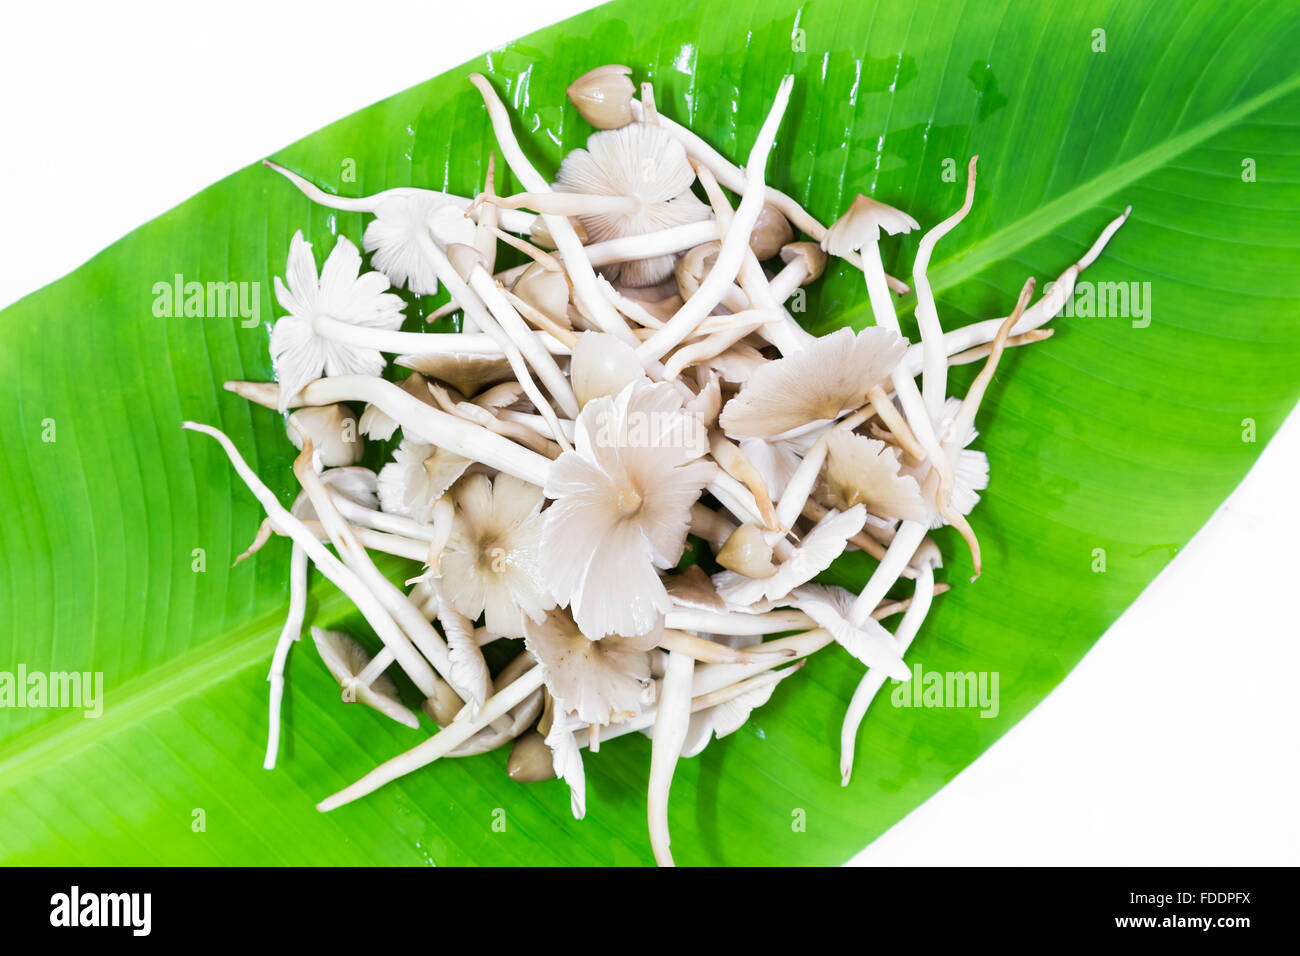 Ehedocn placed on banana leaves for cooking.(Silver Sillago) Stock Photo